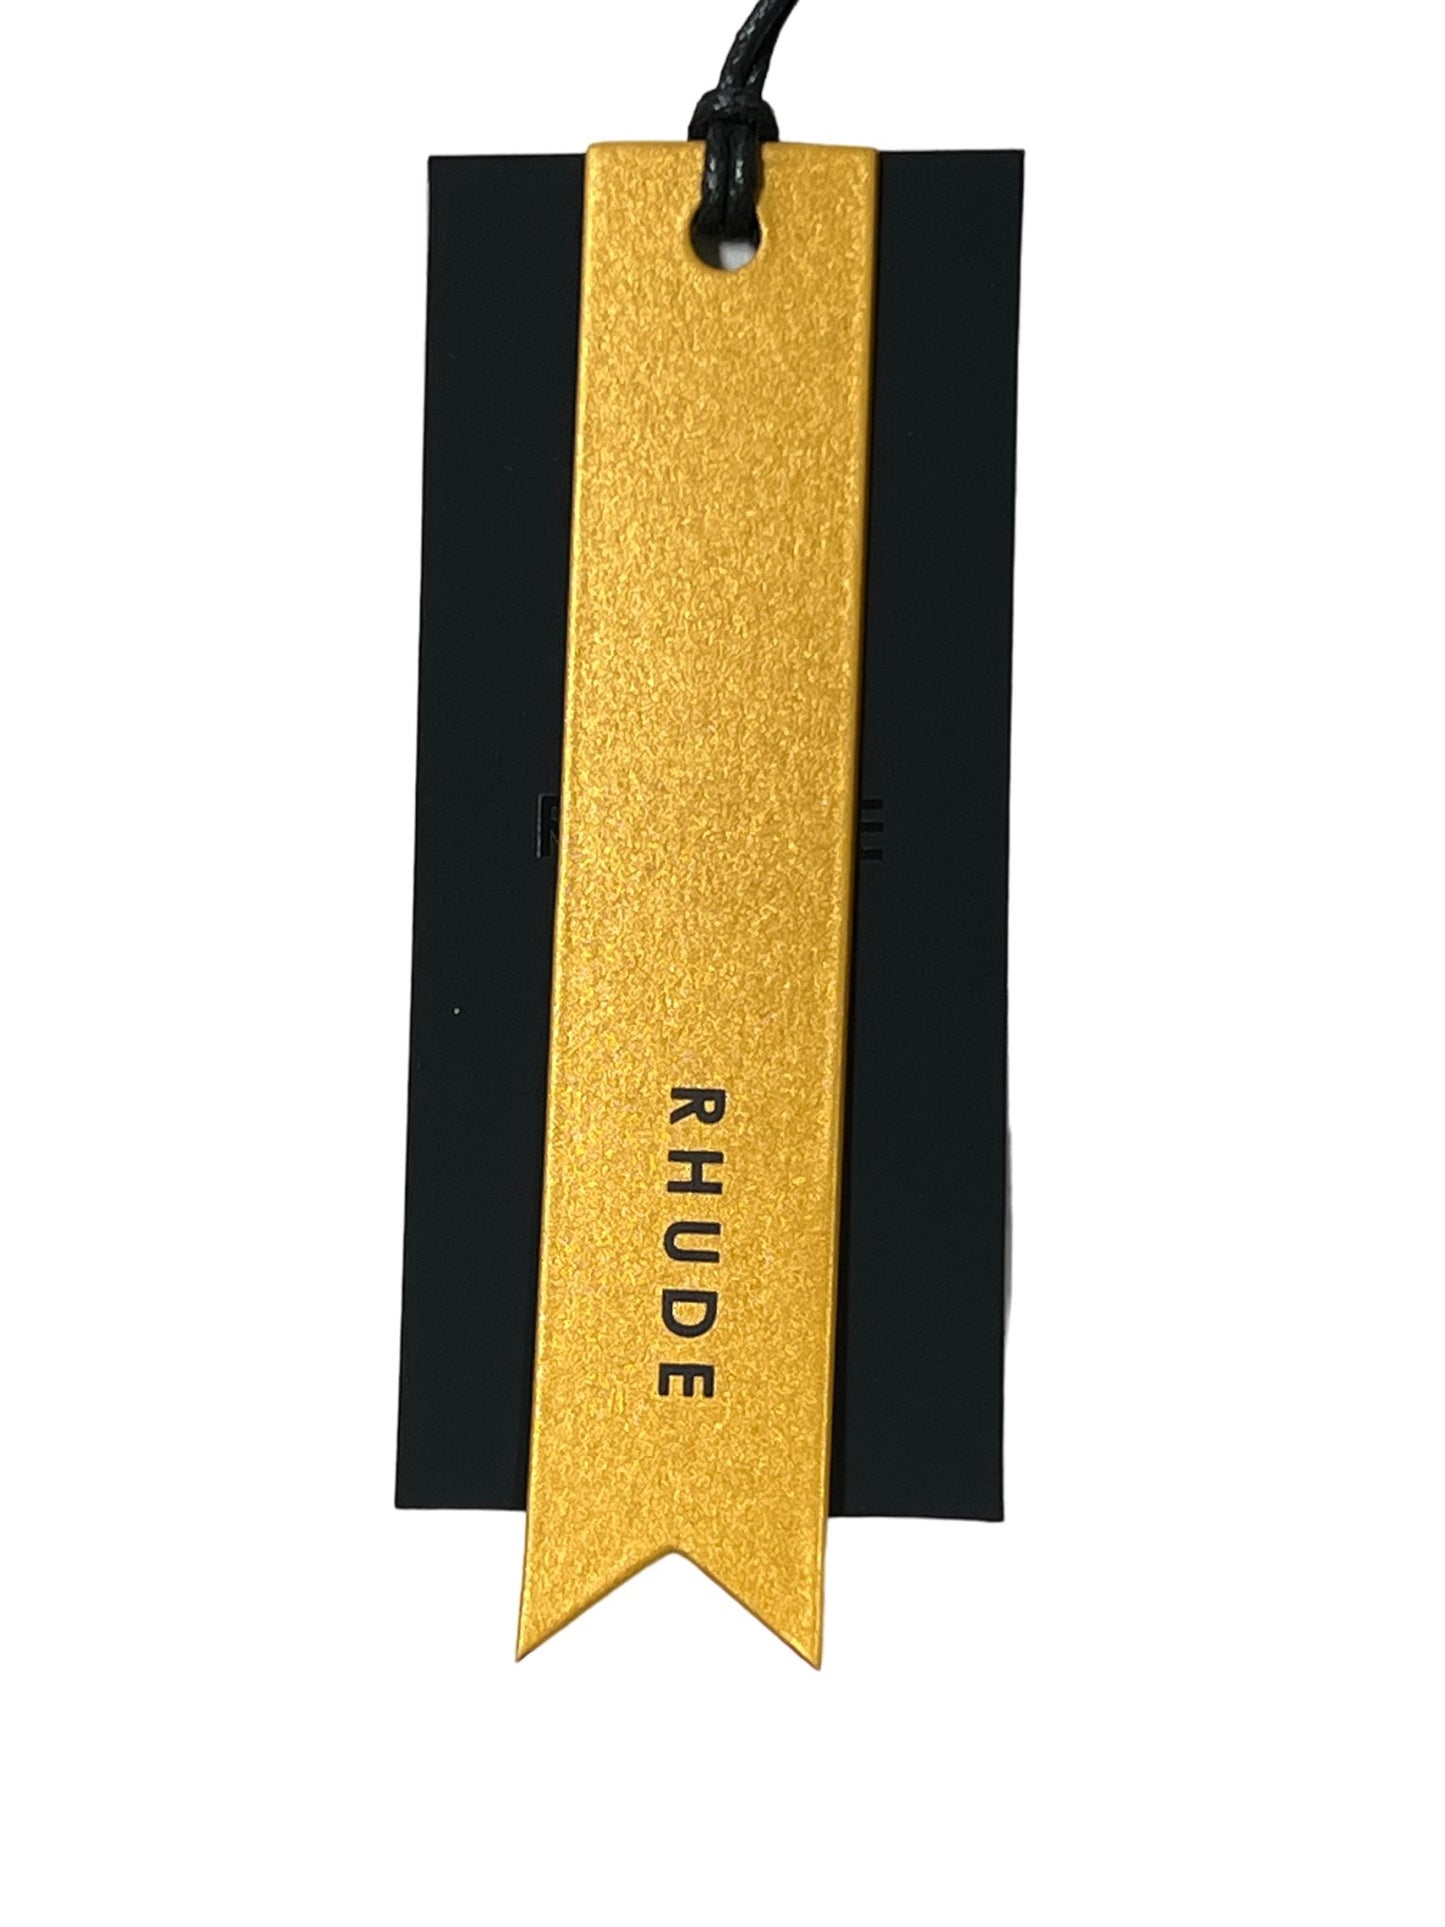 A gold and black clothing tag with the words "RHUDE Basketball swim shorts khaki" printed on it.